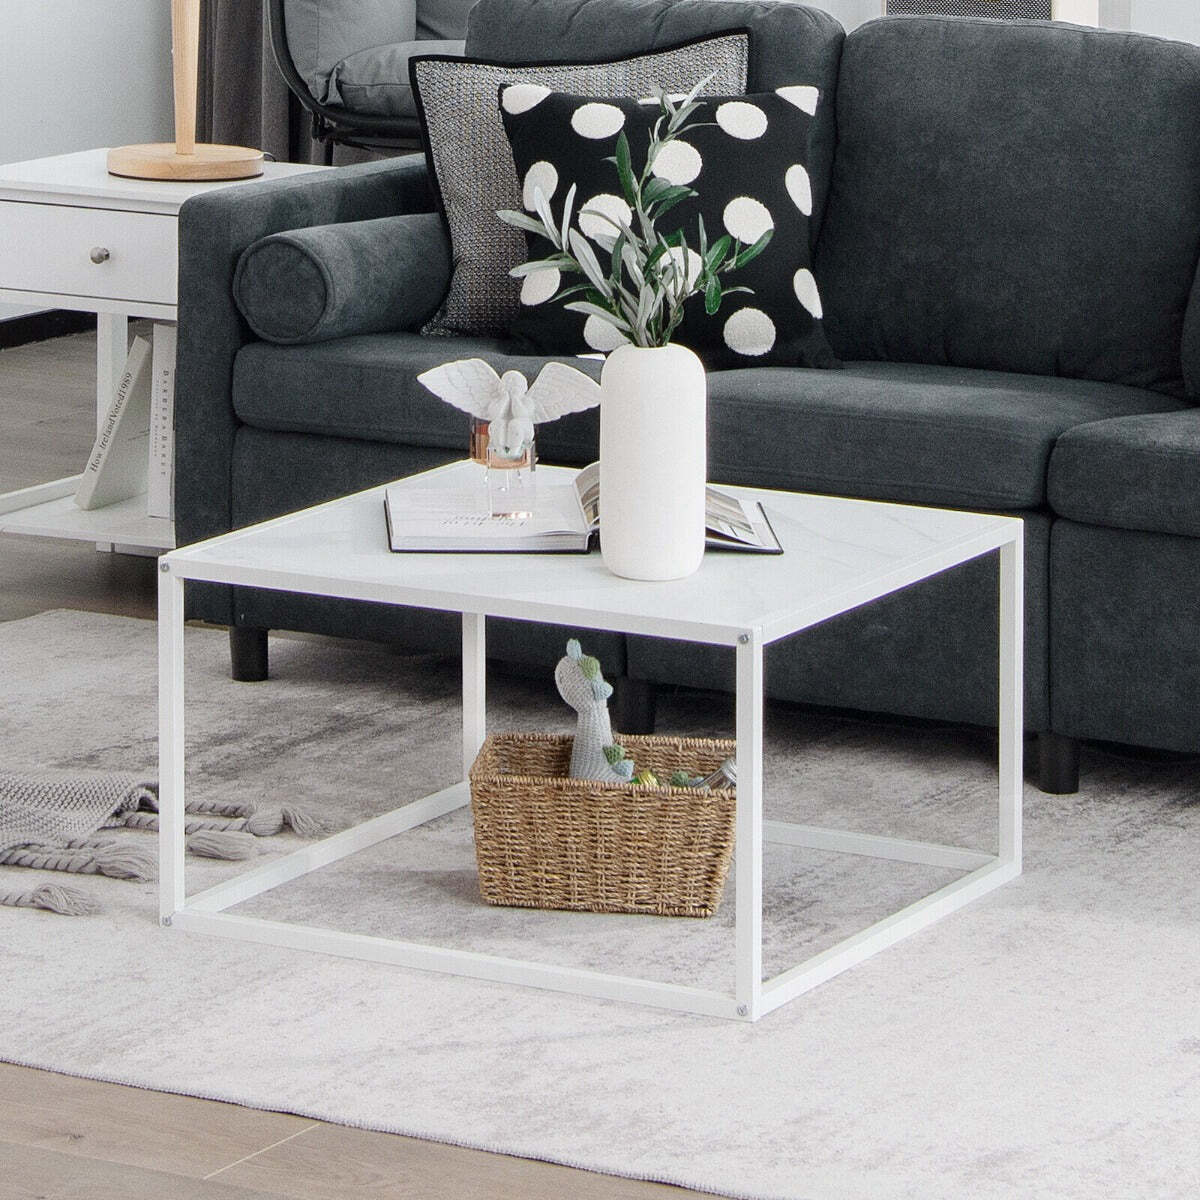 NNECW Modern Square Leisure Coffee Table with Faux Marble Tabletop-White